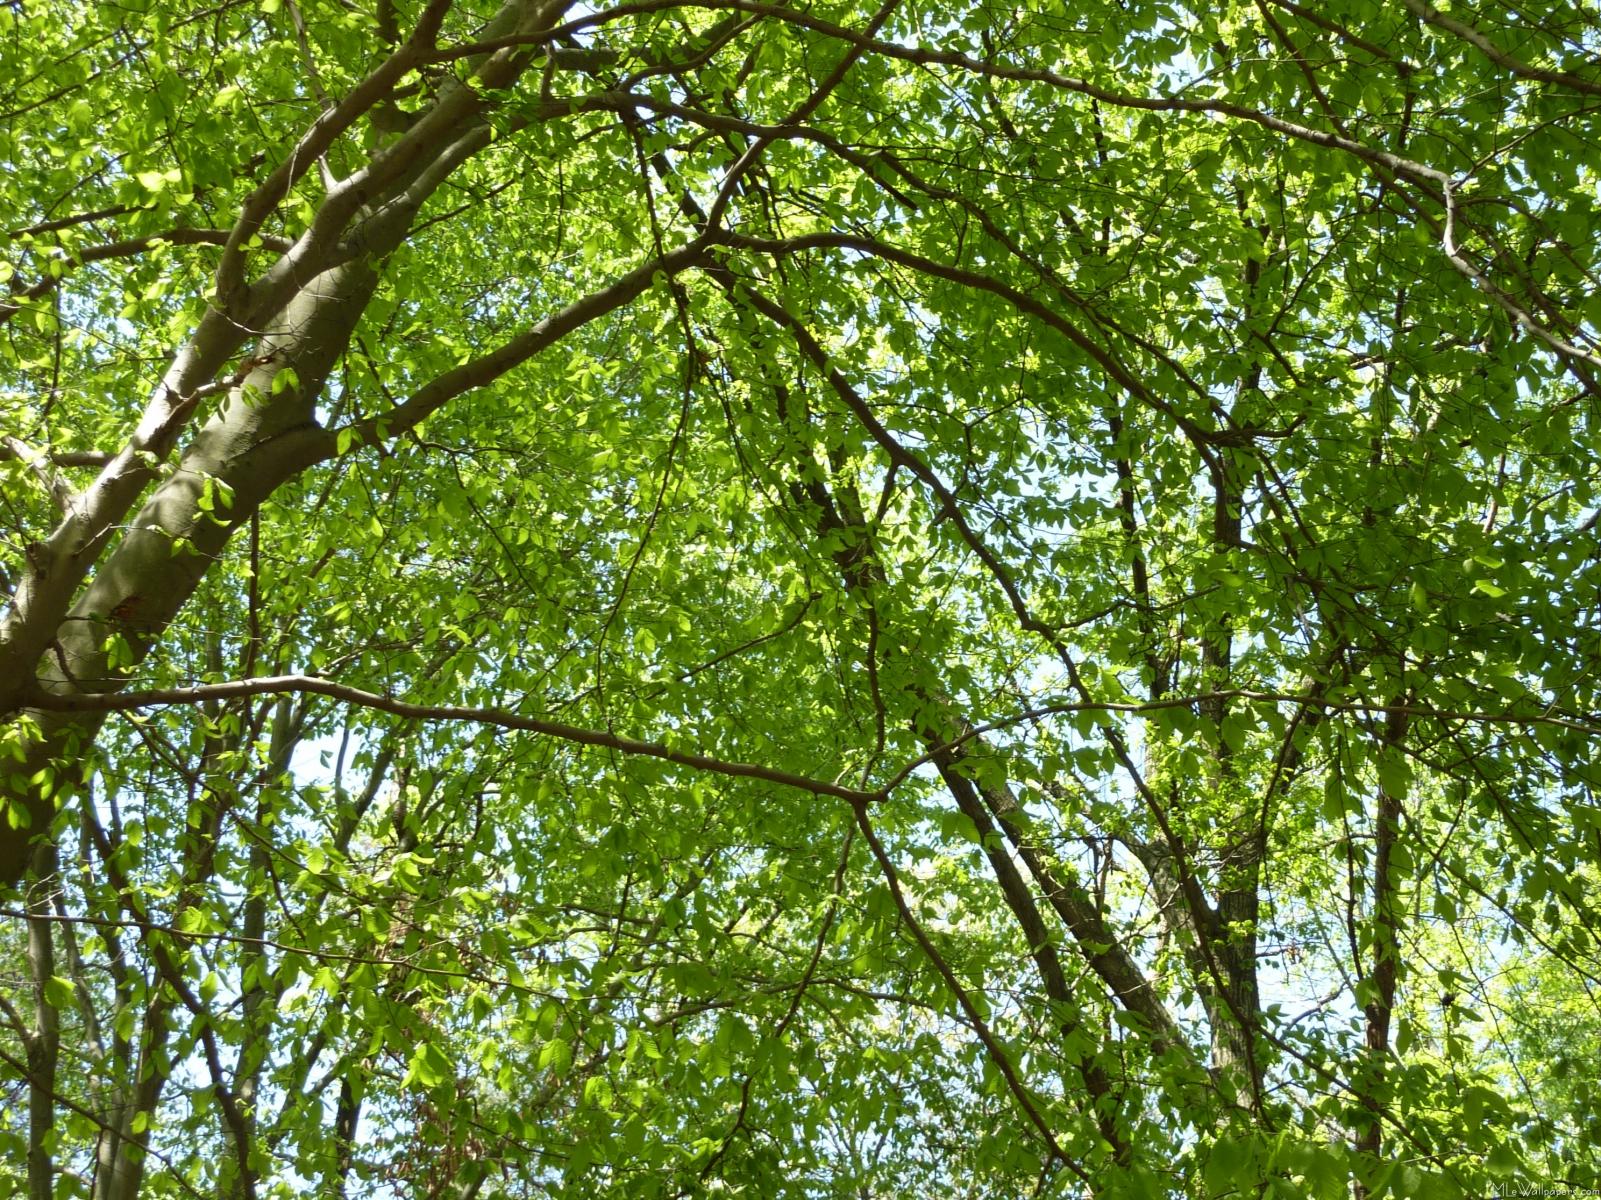 MLeWallpapers.com - Canopy of Spring Leaves